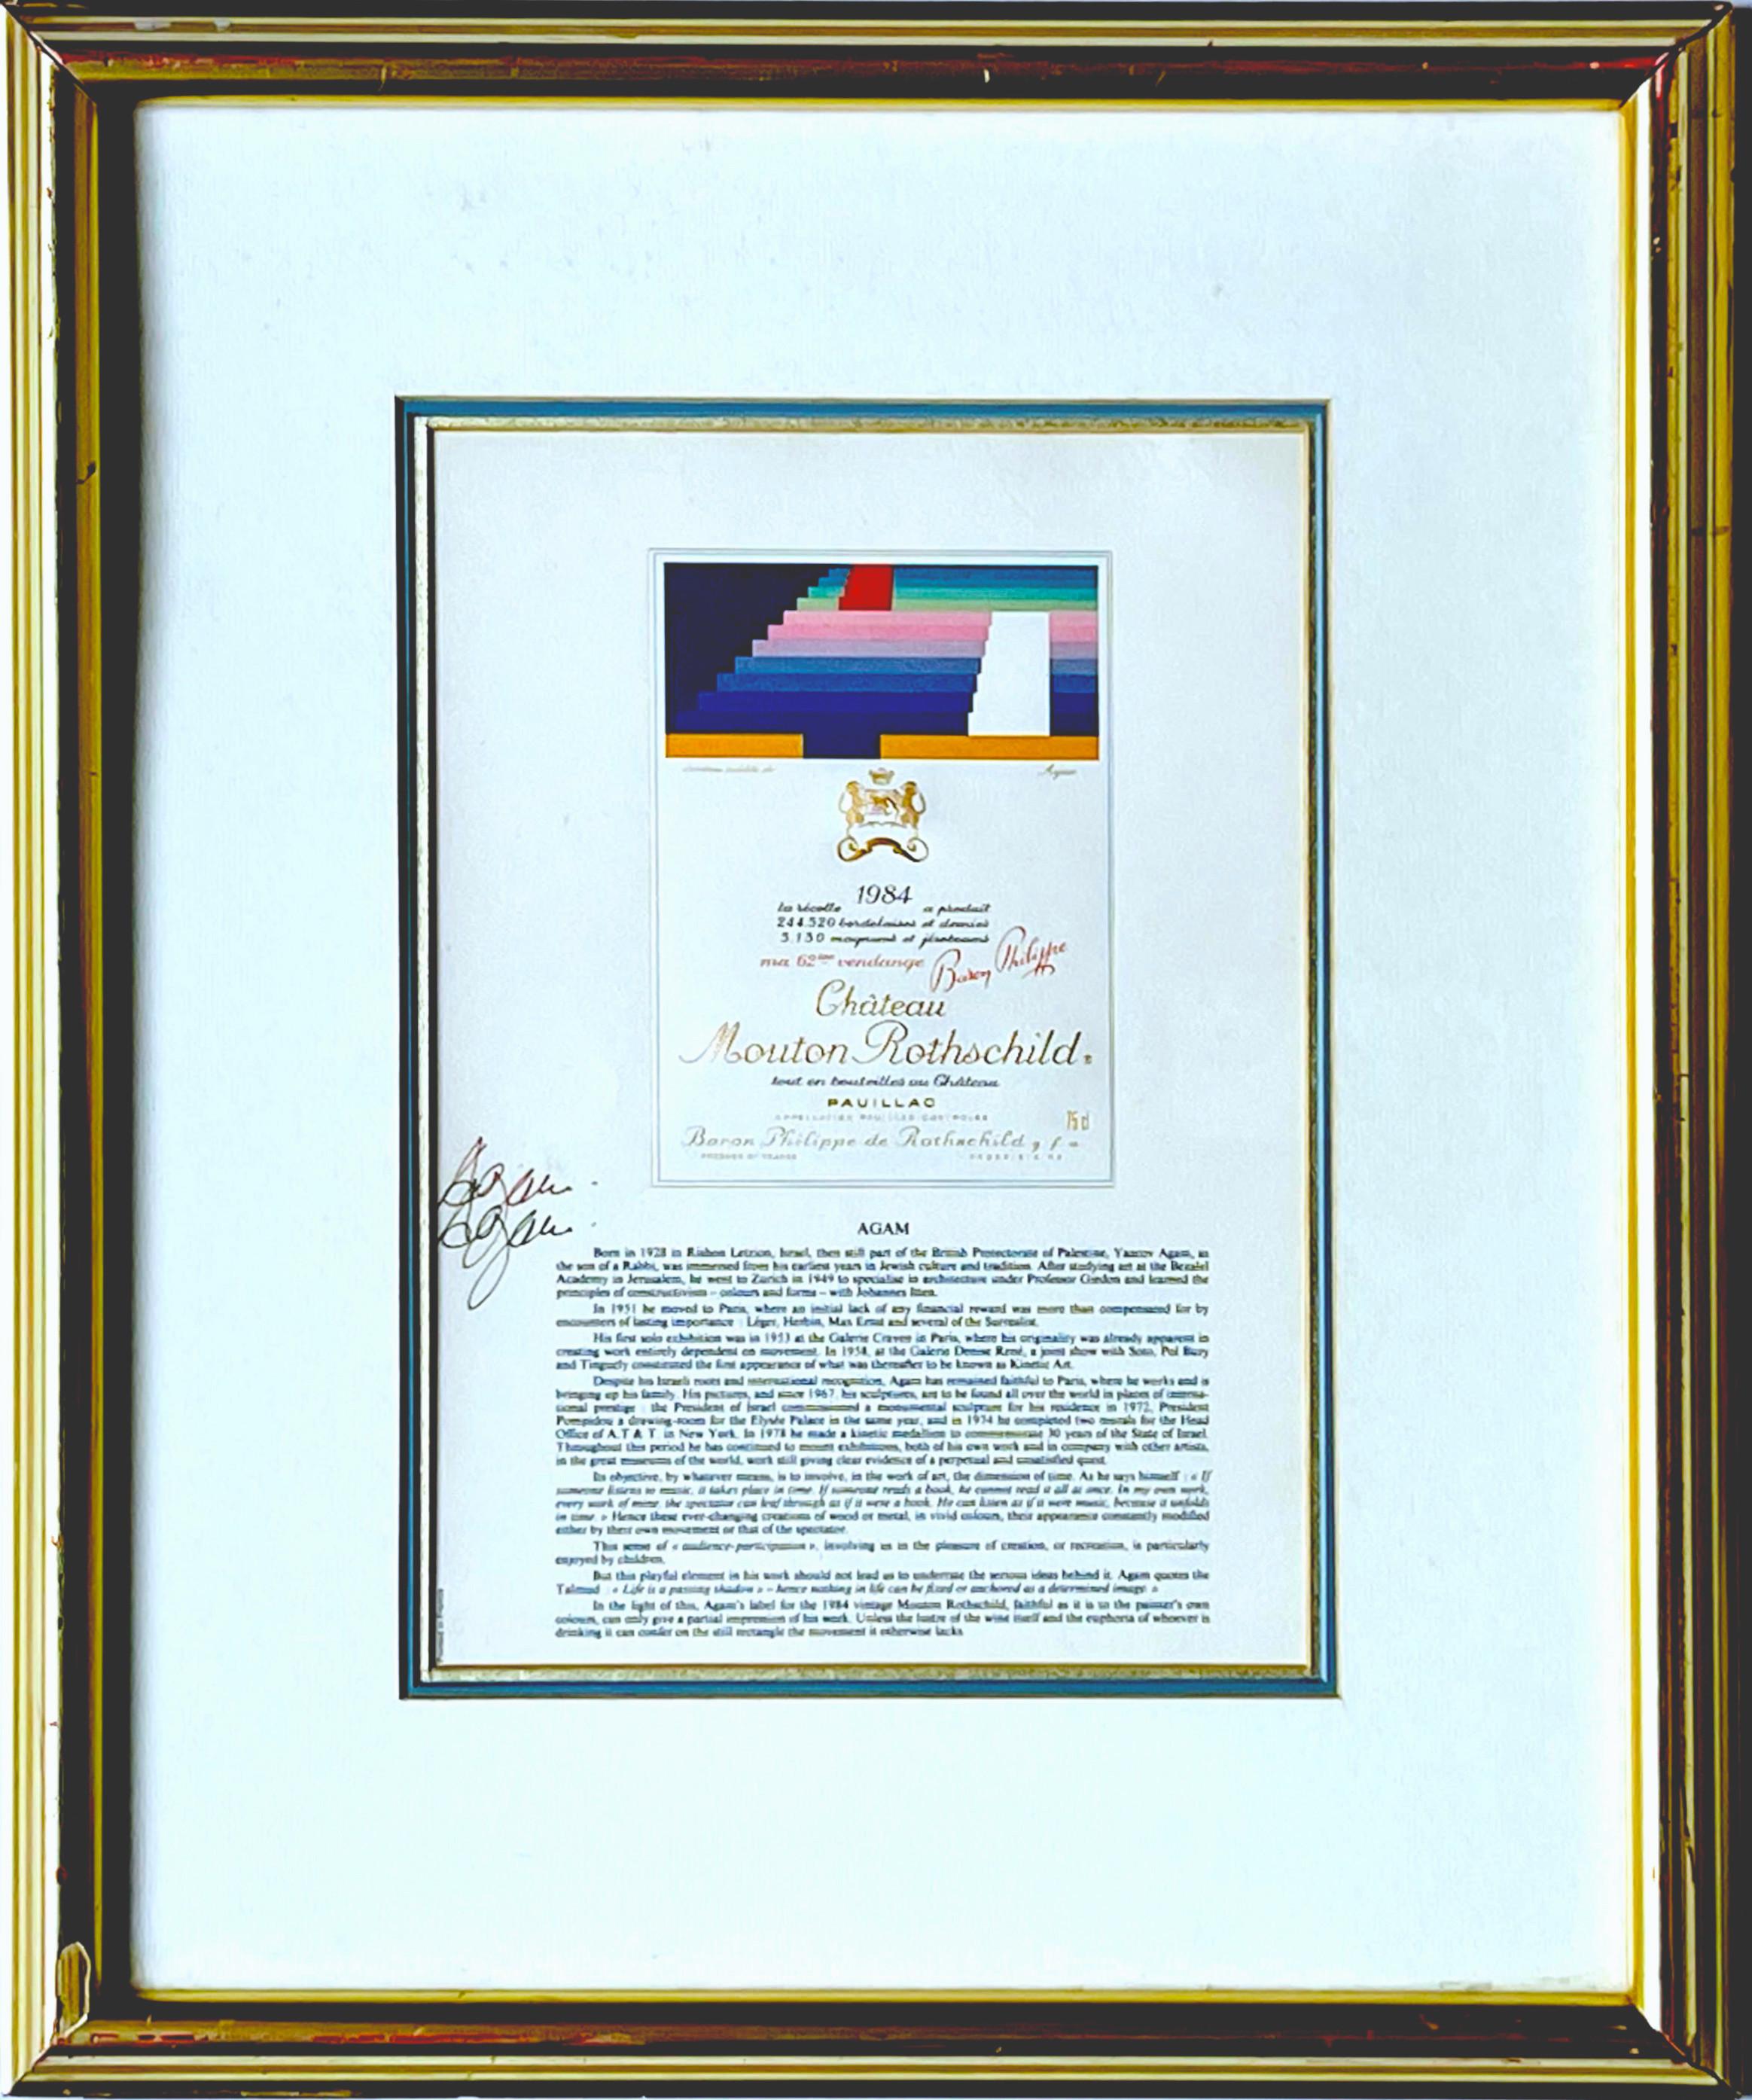 Chateau Mouton Rothschild label (hand signed) - Print by Yaacov Agam